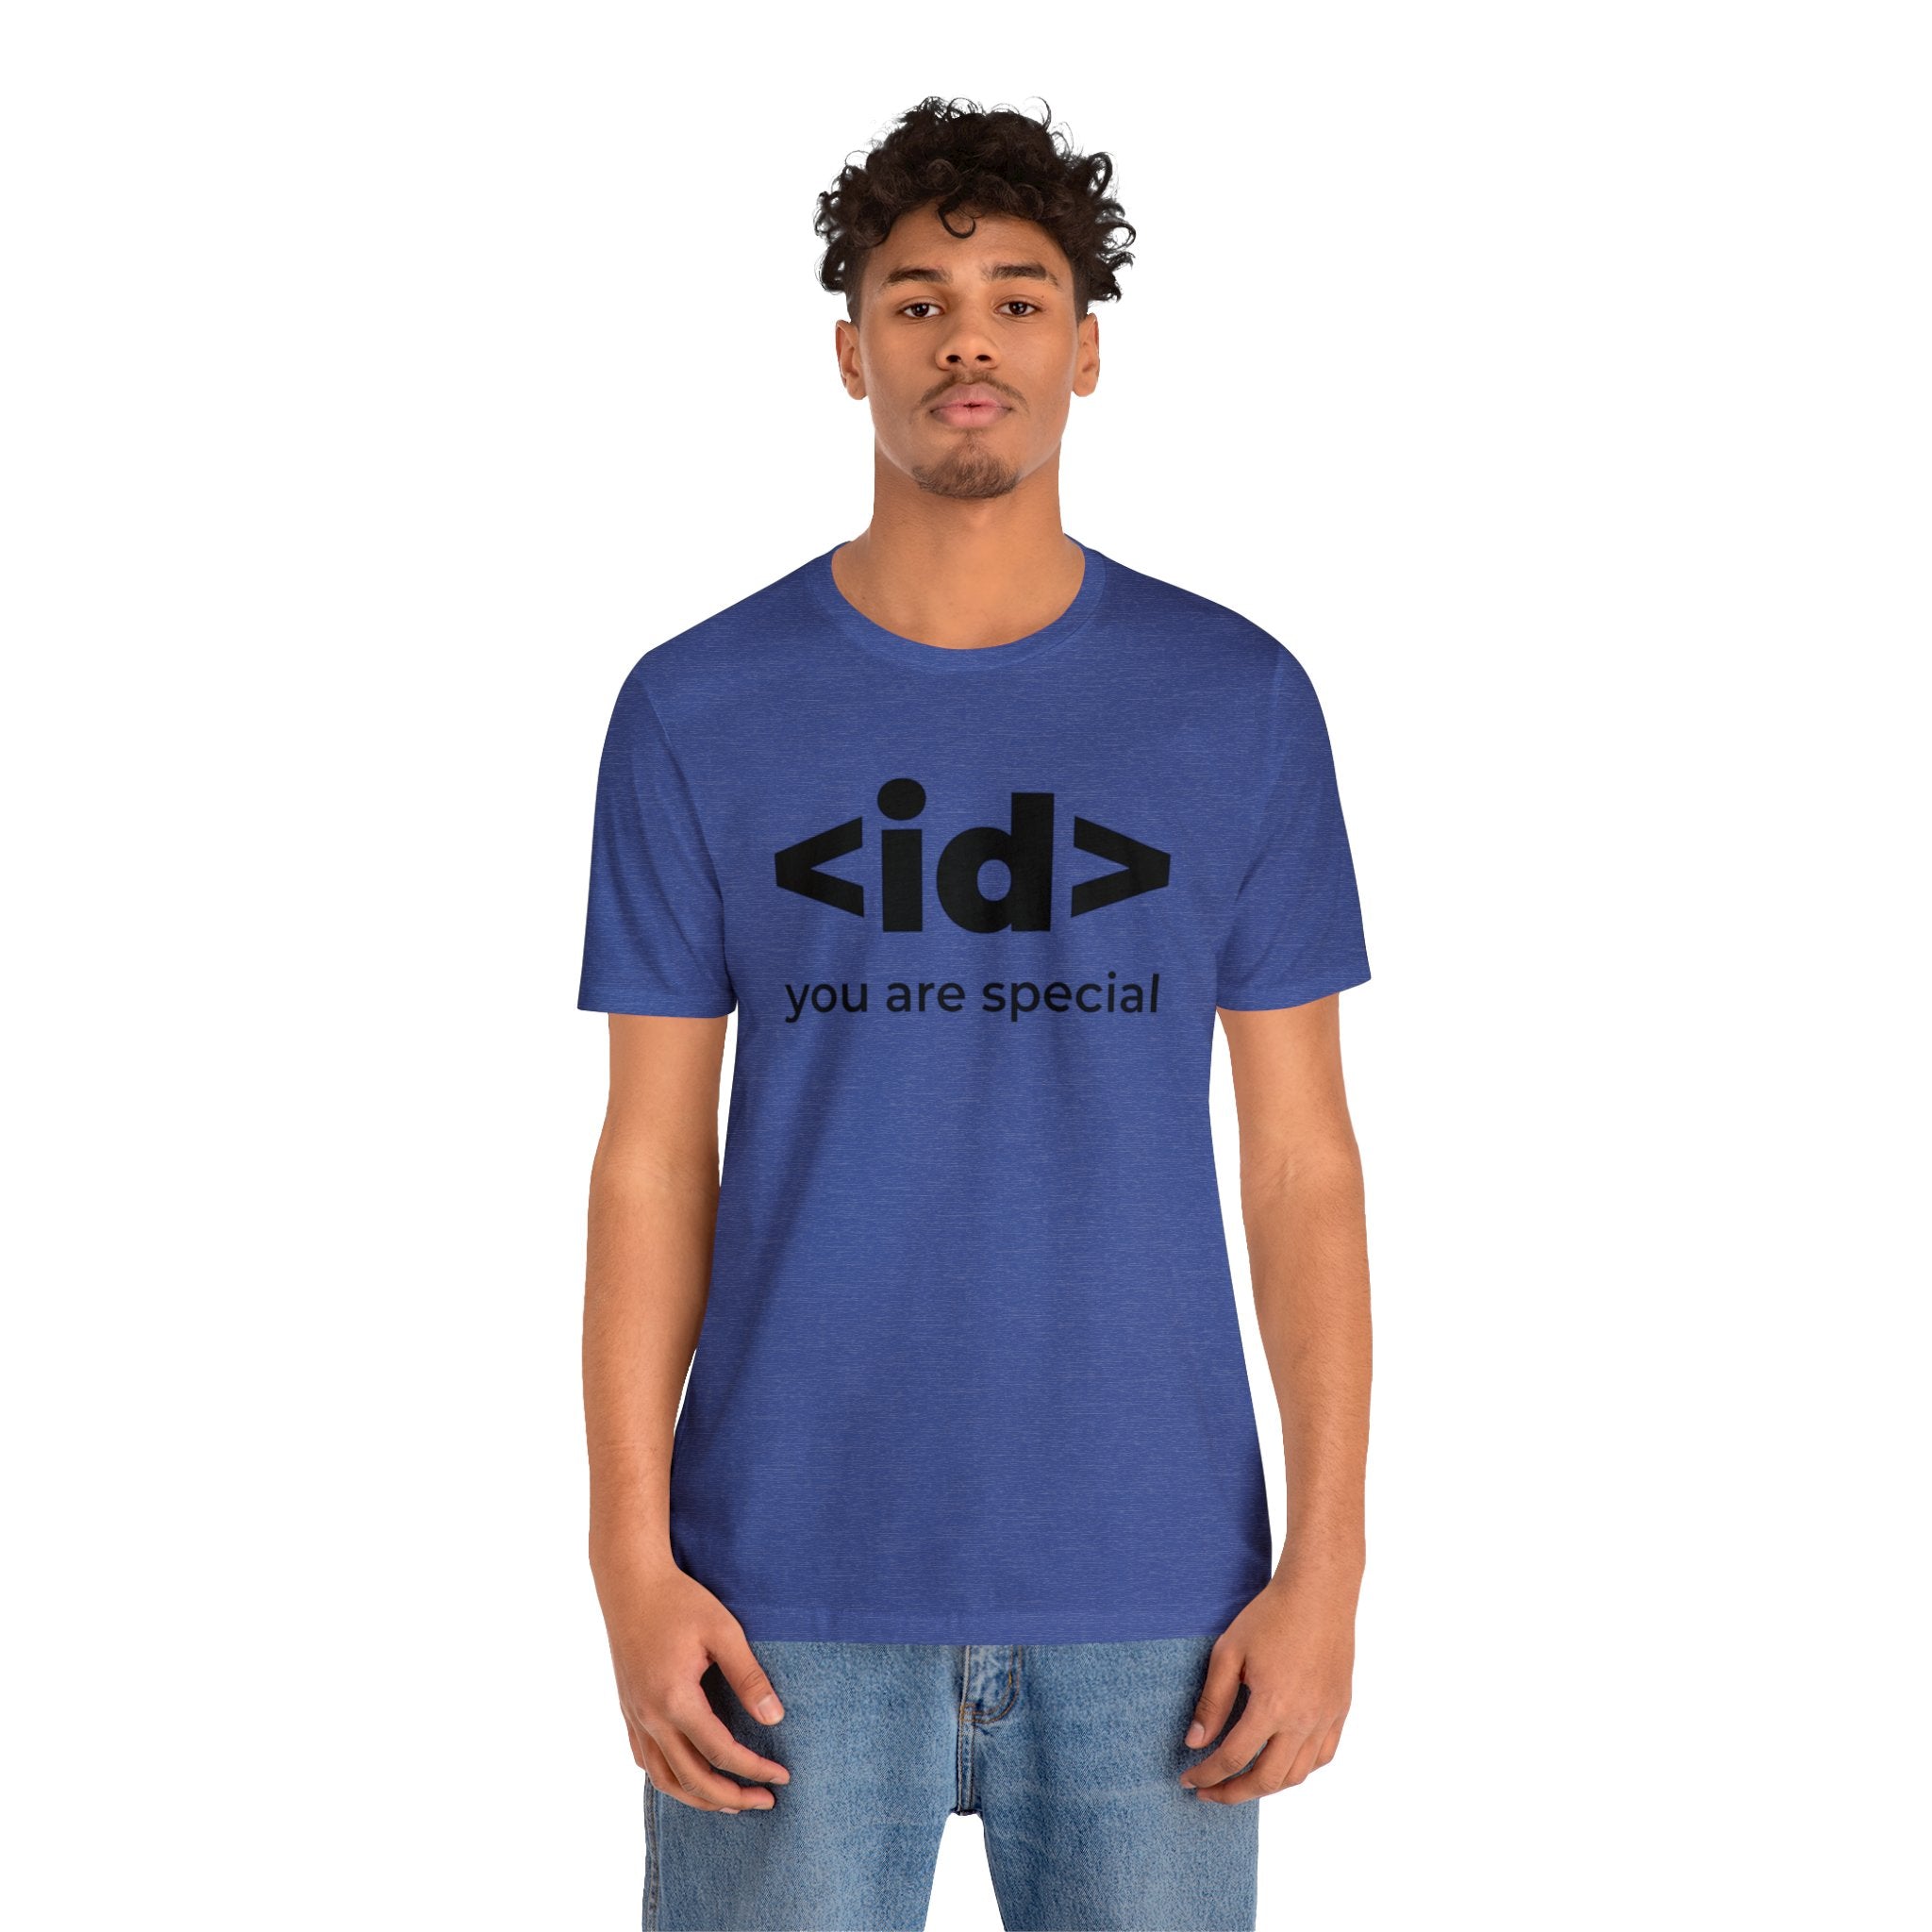 A man wearing a <id> You Are Special T-Shirt.